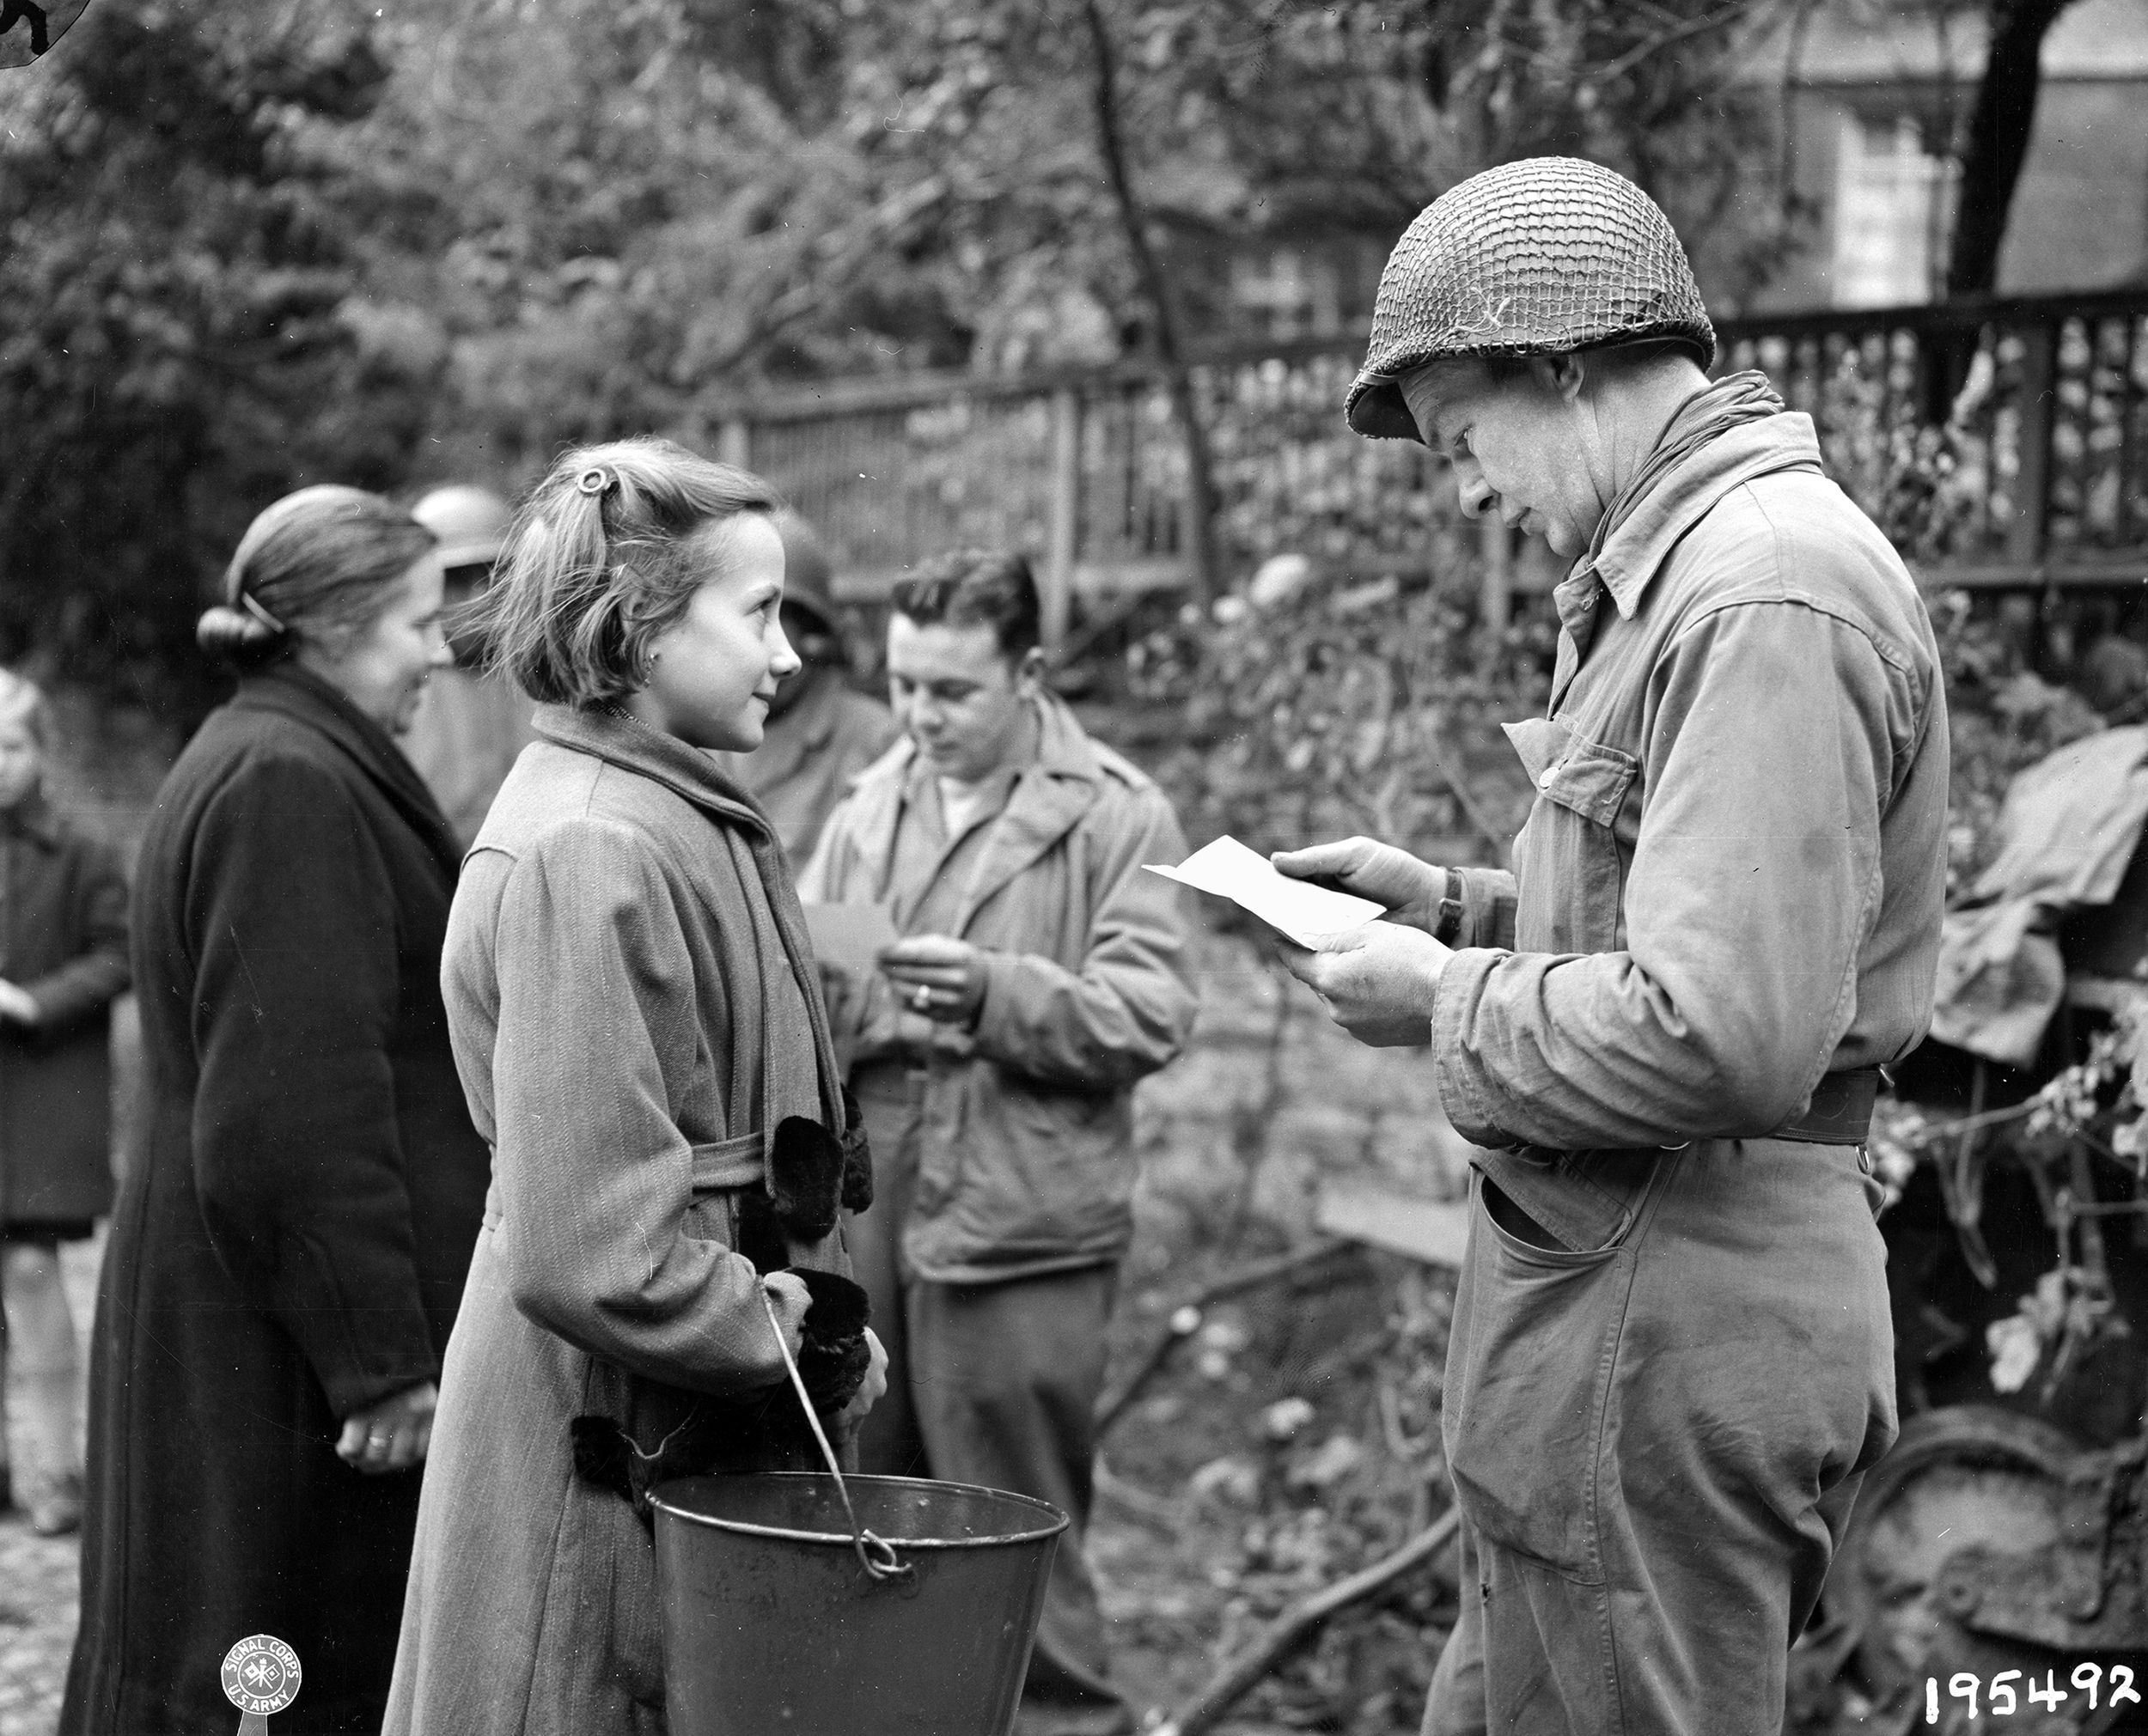 An American soldier inspects the papers of a young German girl. Cohn discovered a Dutch woman in Cologne who sheltered two girls and used her own food ration card to feed them. He was shocked to learn the girls could not get ration cards because they were Jewish.